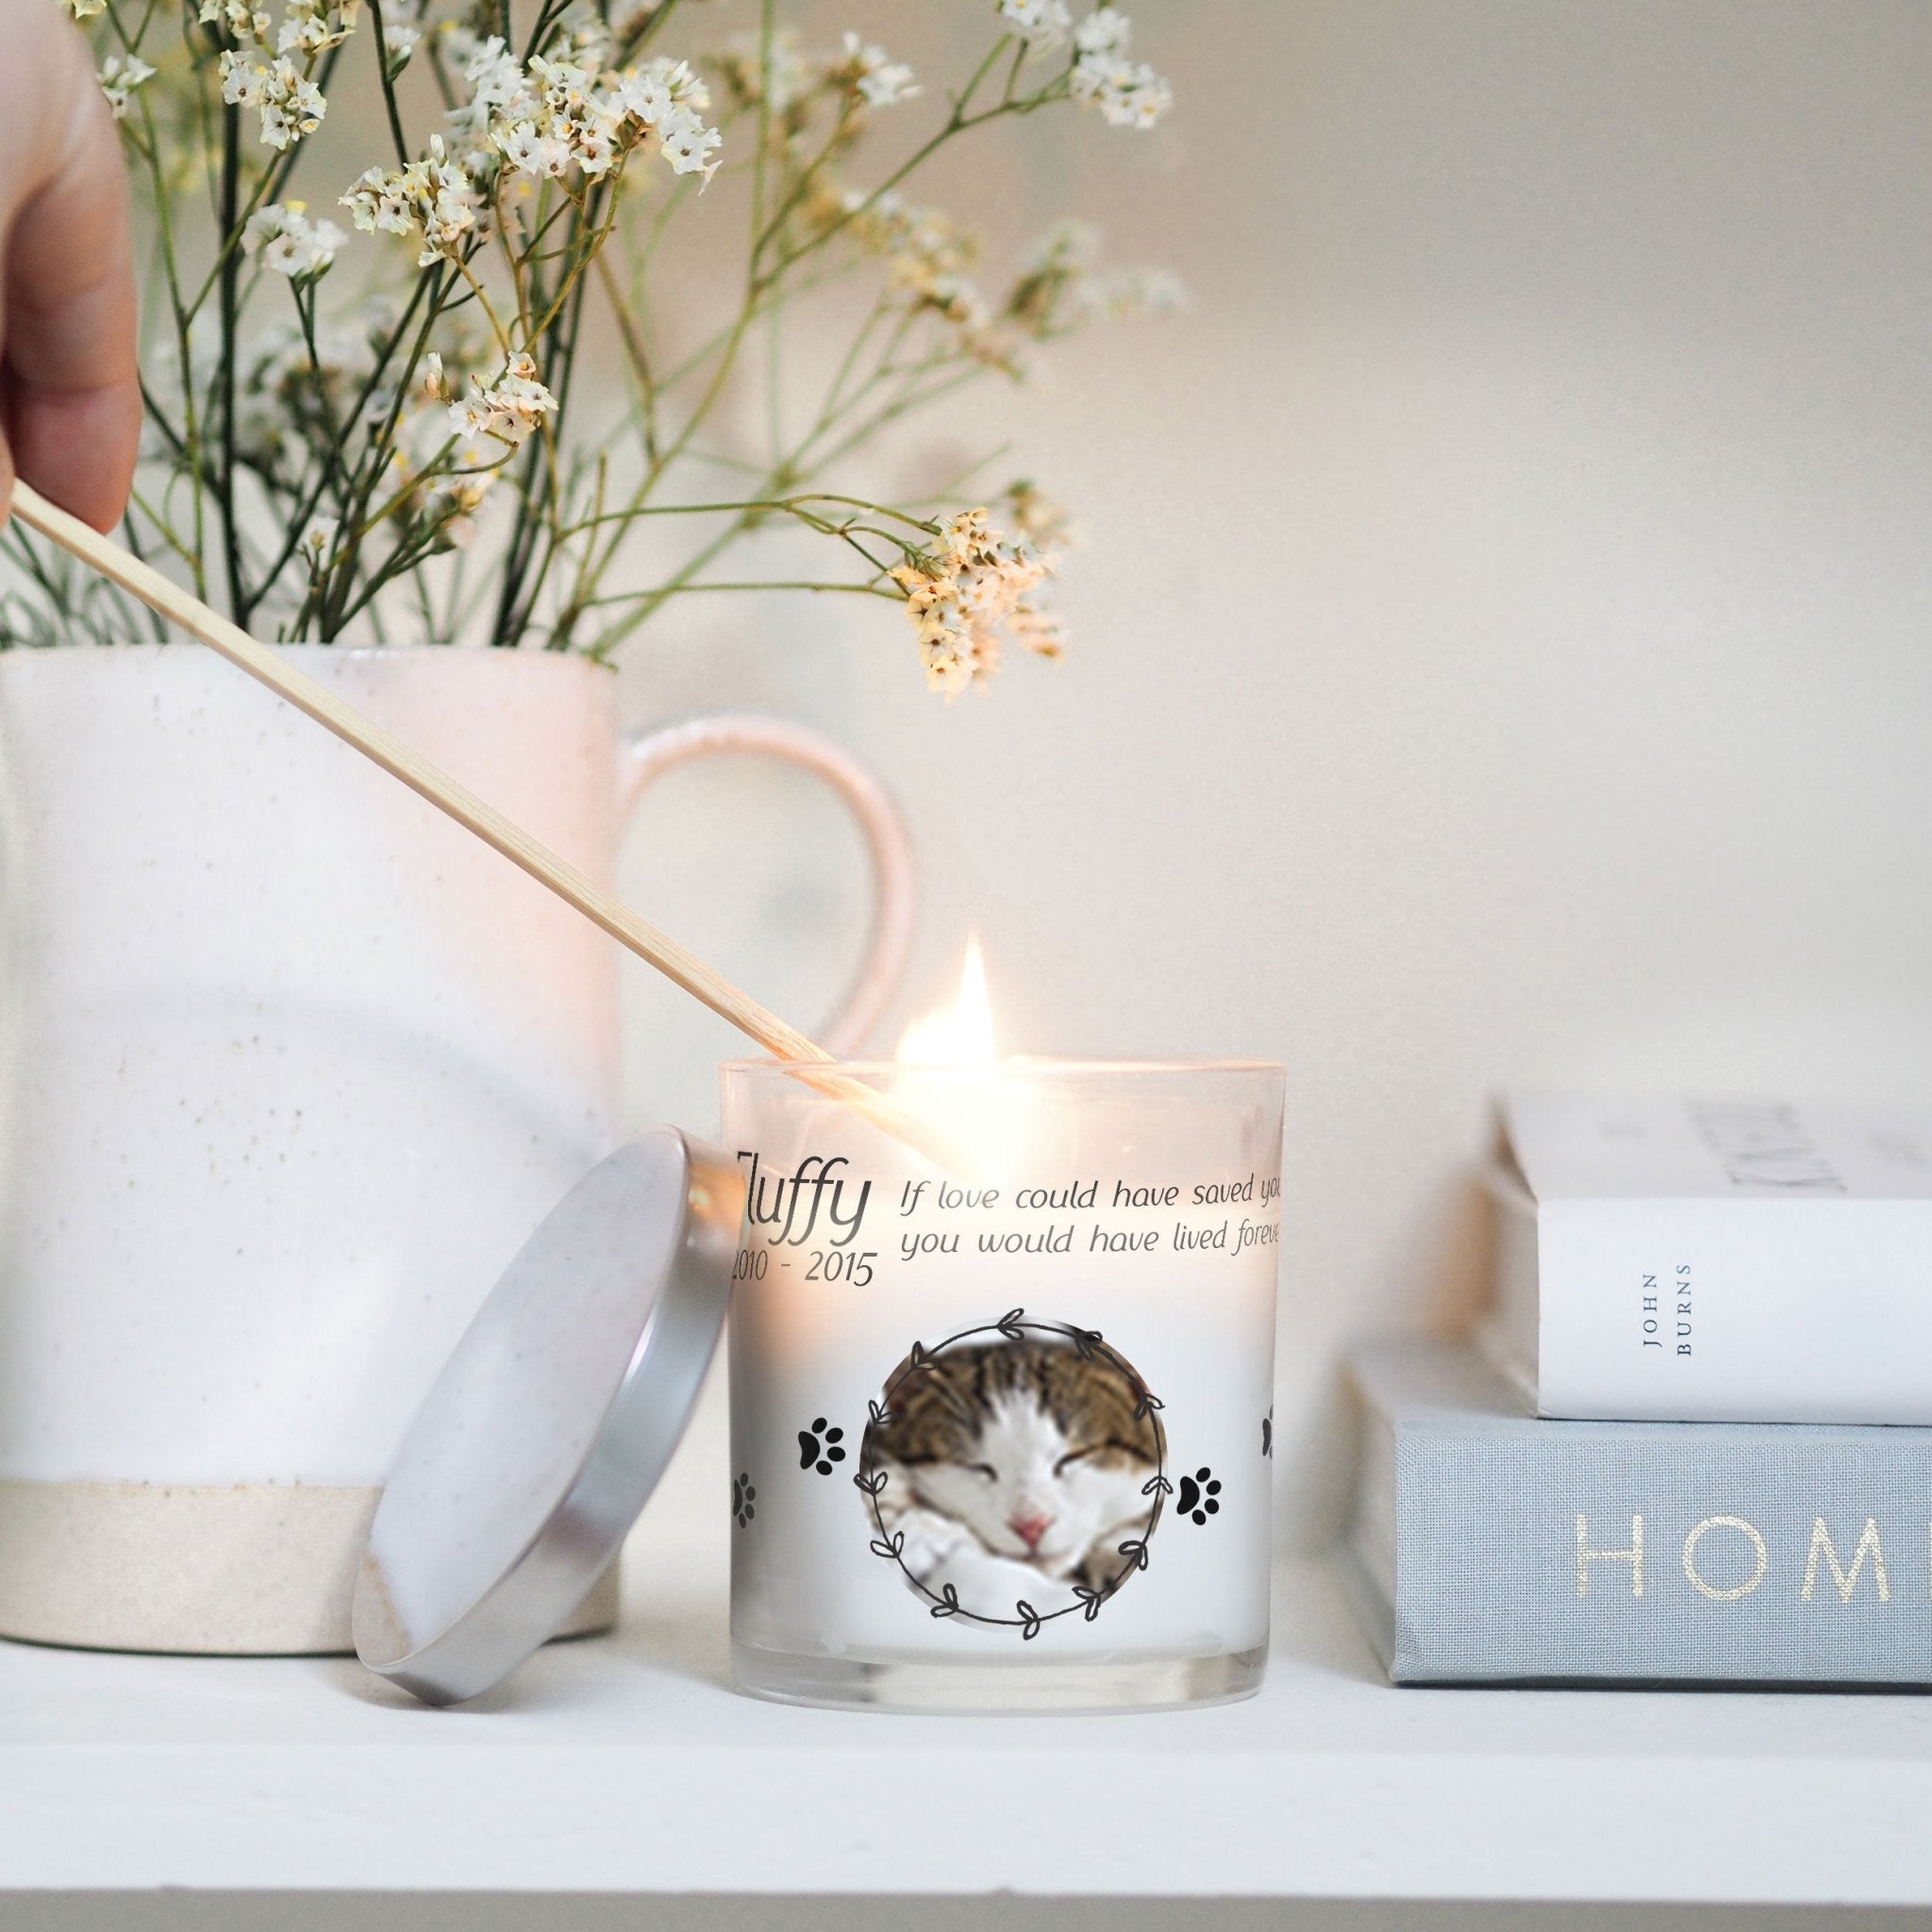 Cat Memorial Custom Photo Candle Holder | Fur Baby, Pet Loss Gift Idea | Personalized Votive Glass with Picture | Crystal Home Decor Present Candleholder - Unique Prints